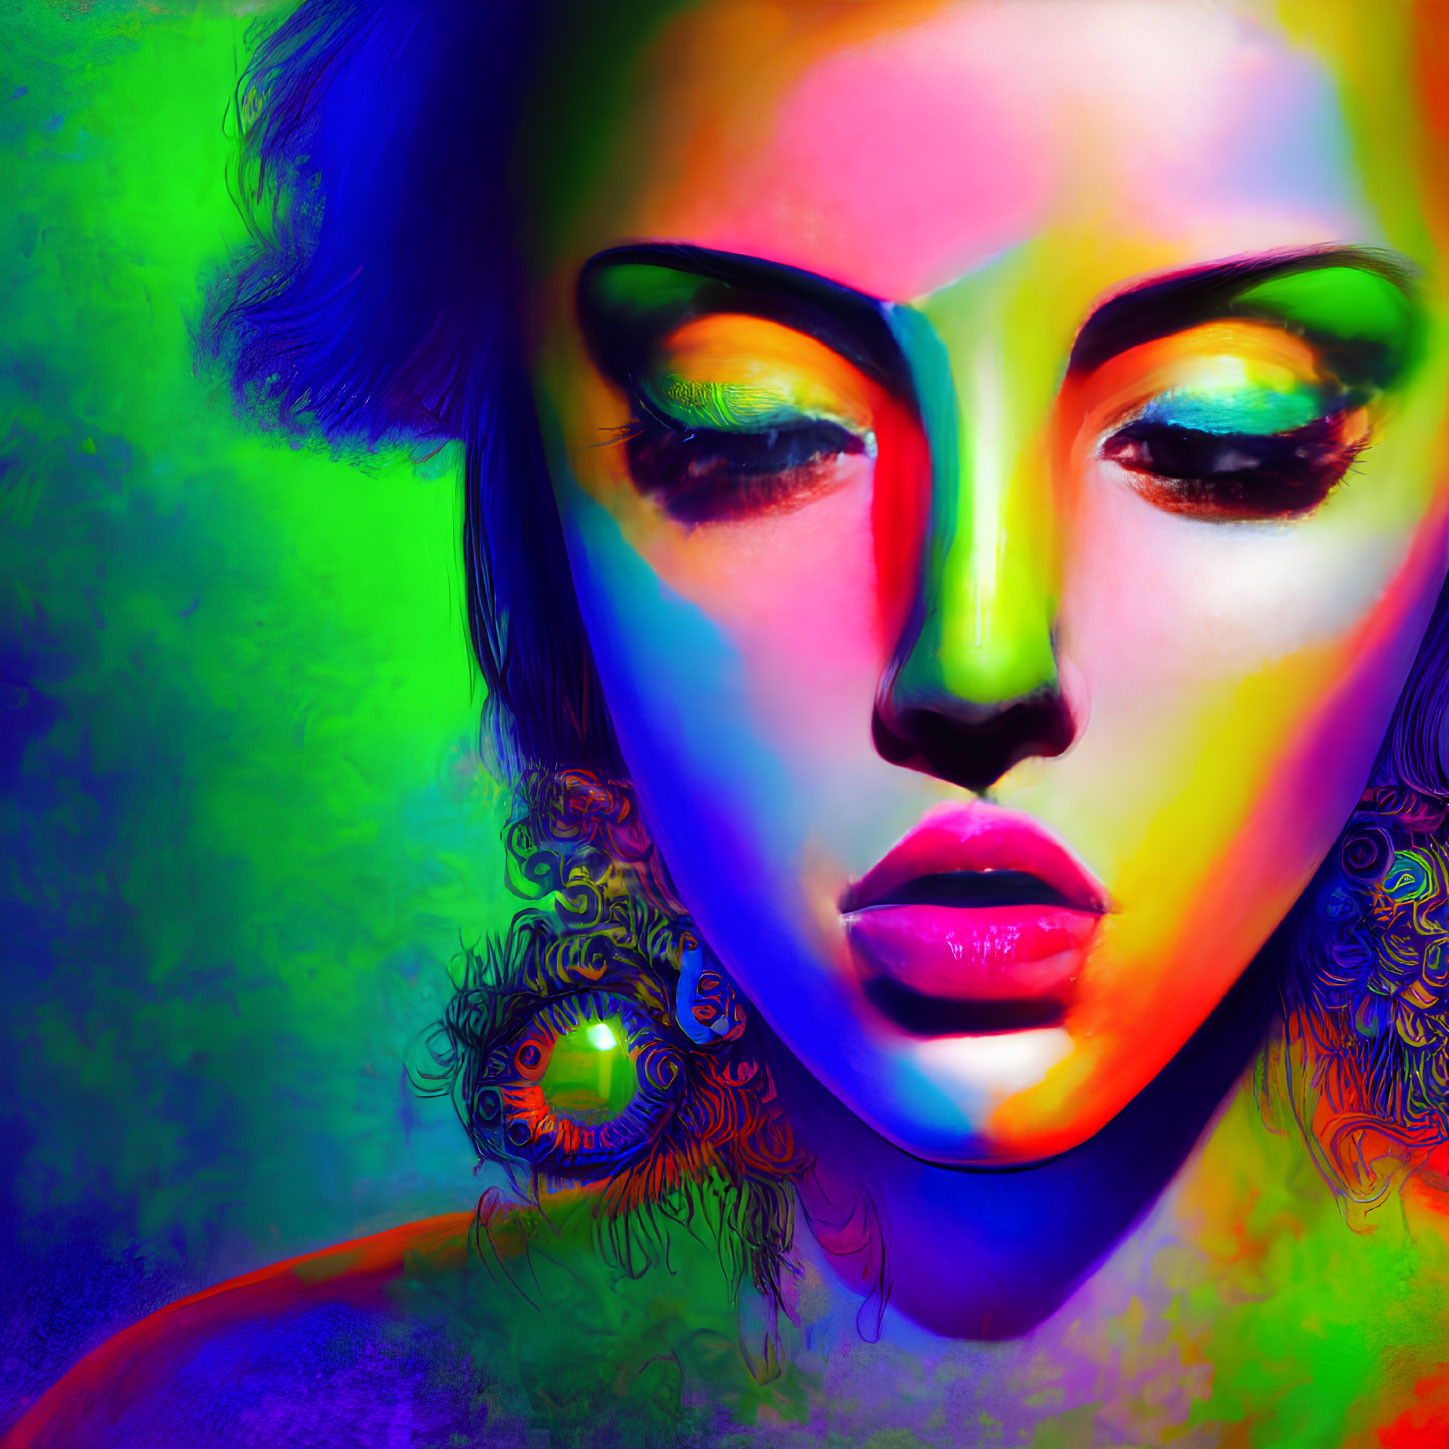 Colorful digital artwork of woman's face with neon colors and peacock feather earrings